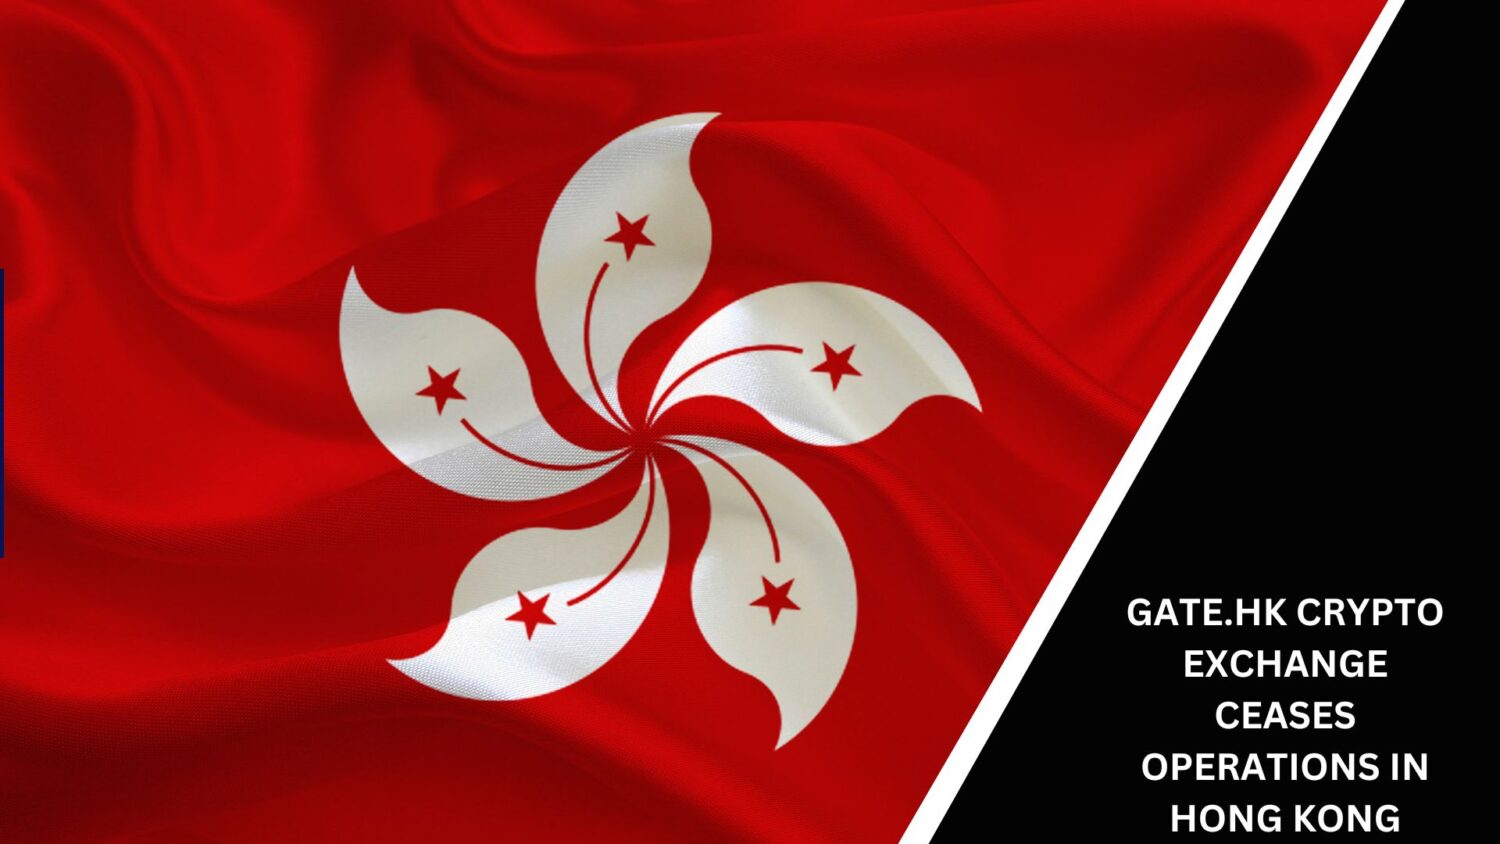 Gate.hk Crypto Exchange Ceases Operations In Hong Kong